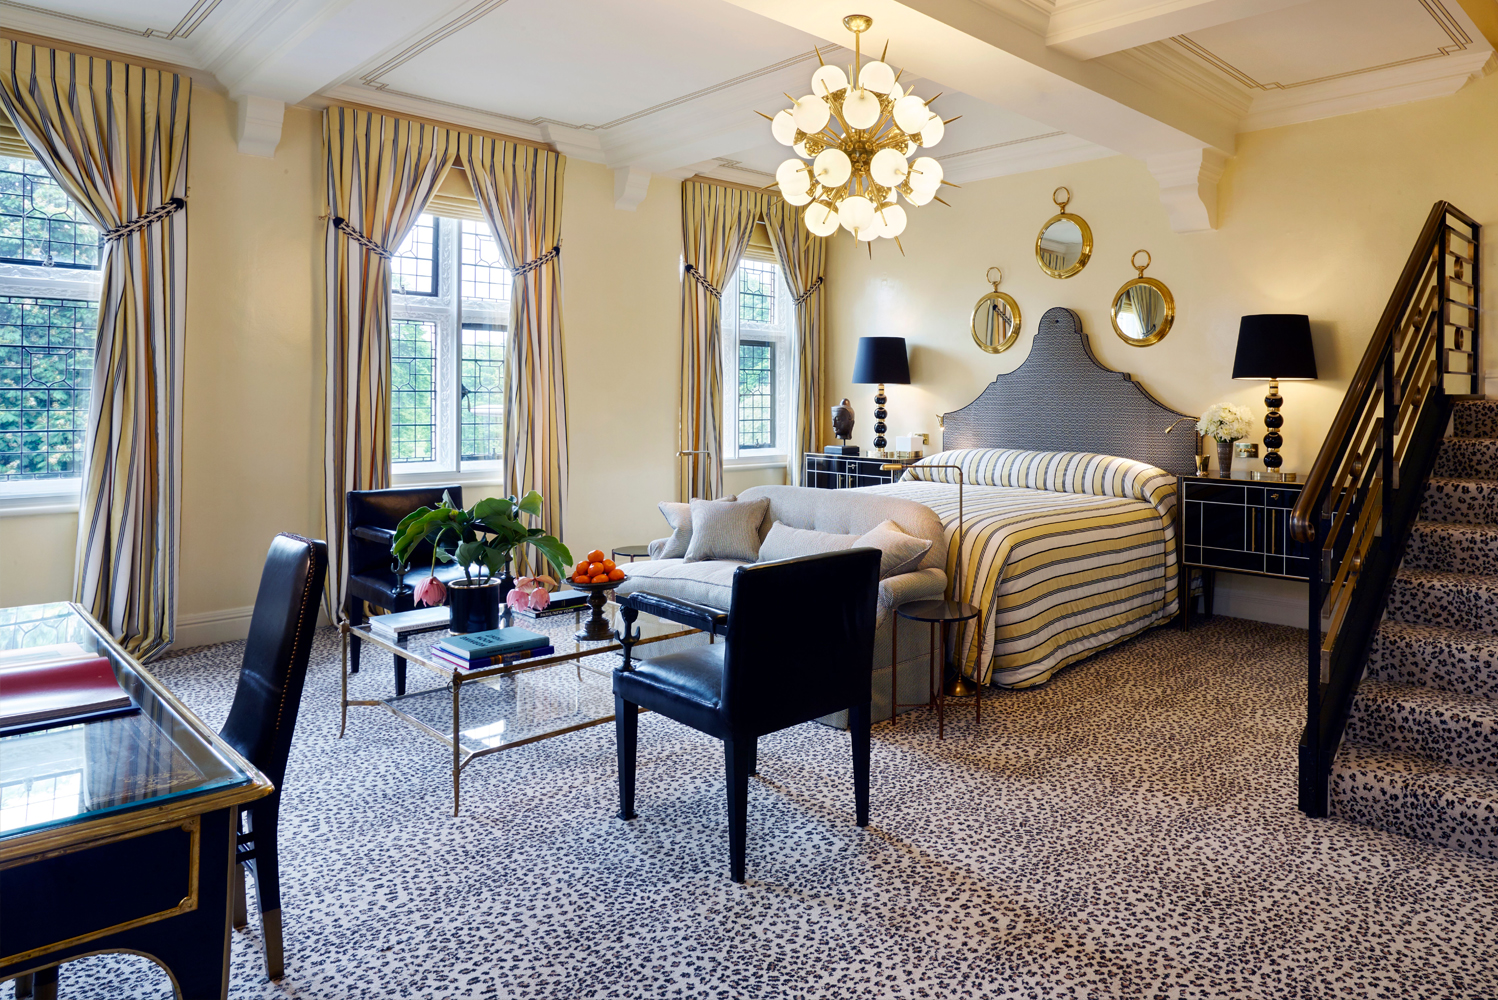 The Milestone Hotel  Residences located across from Kensington Gardens has completed the final phase of its renovations